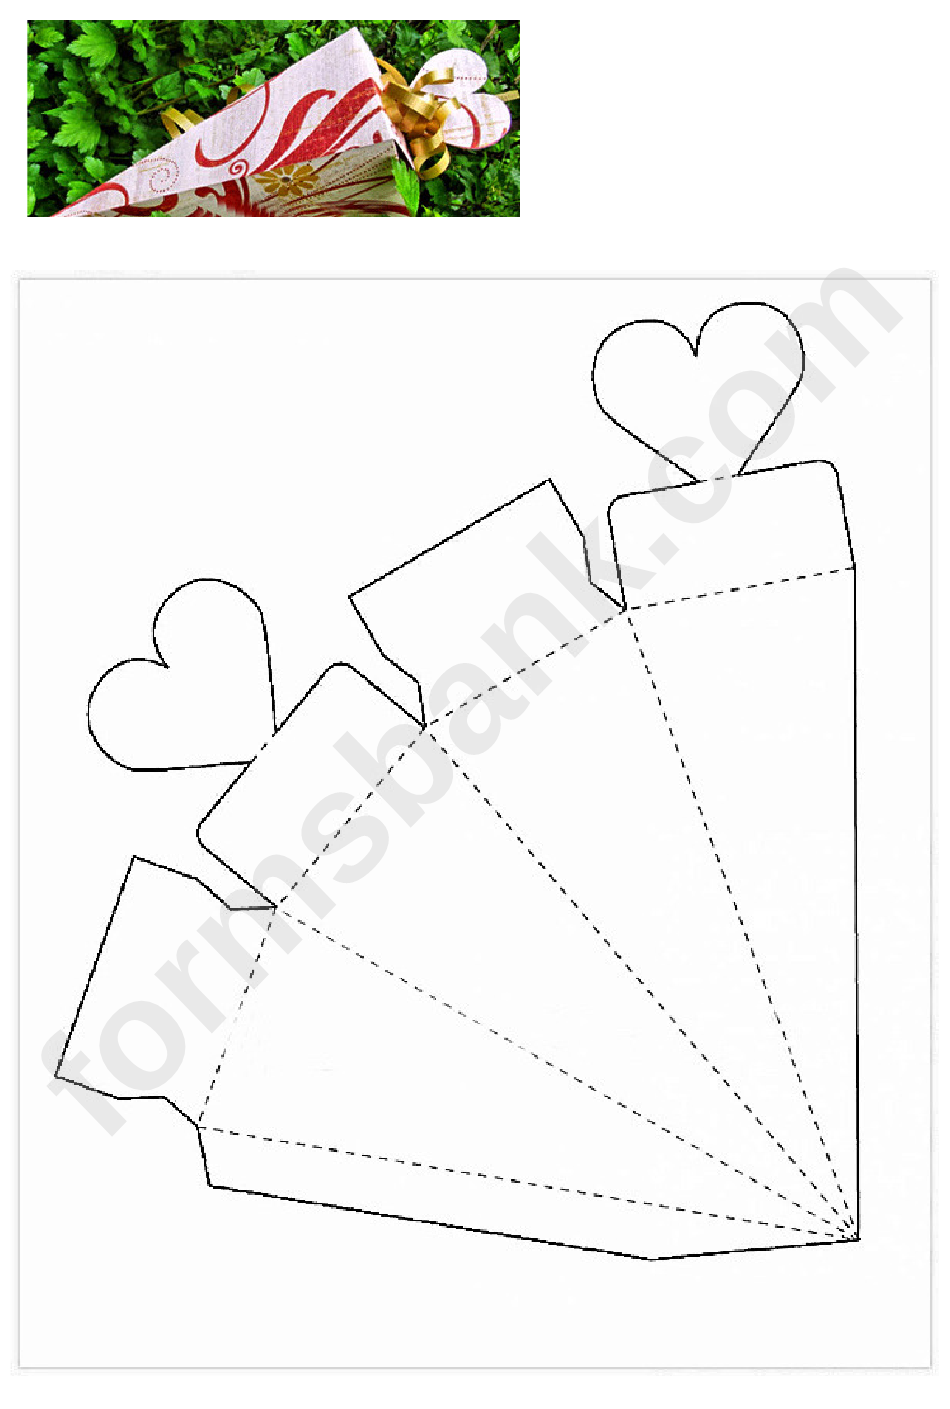 Cone Gift Box With Hearts Template printable pdf download